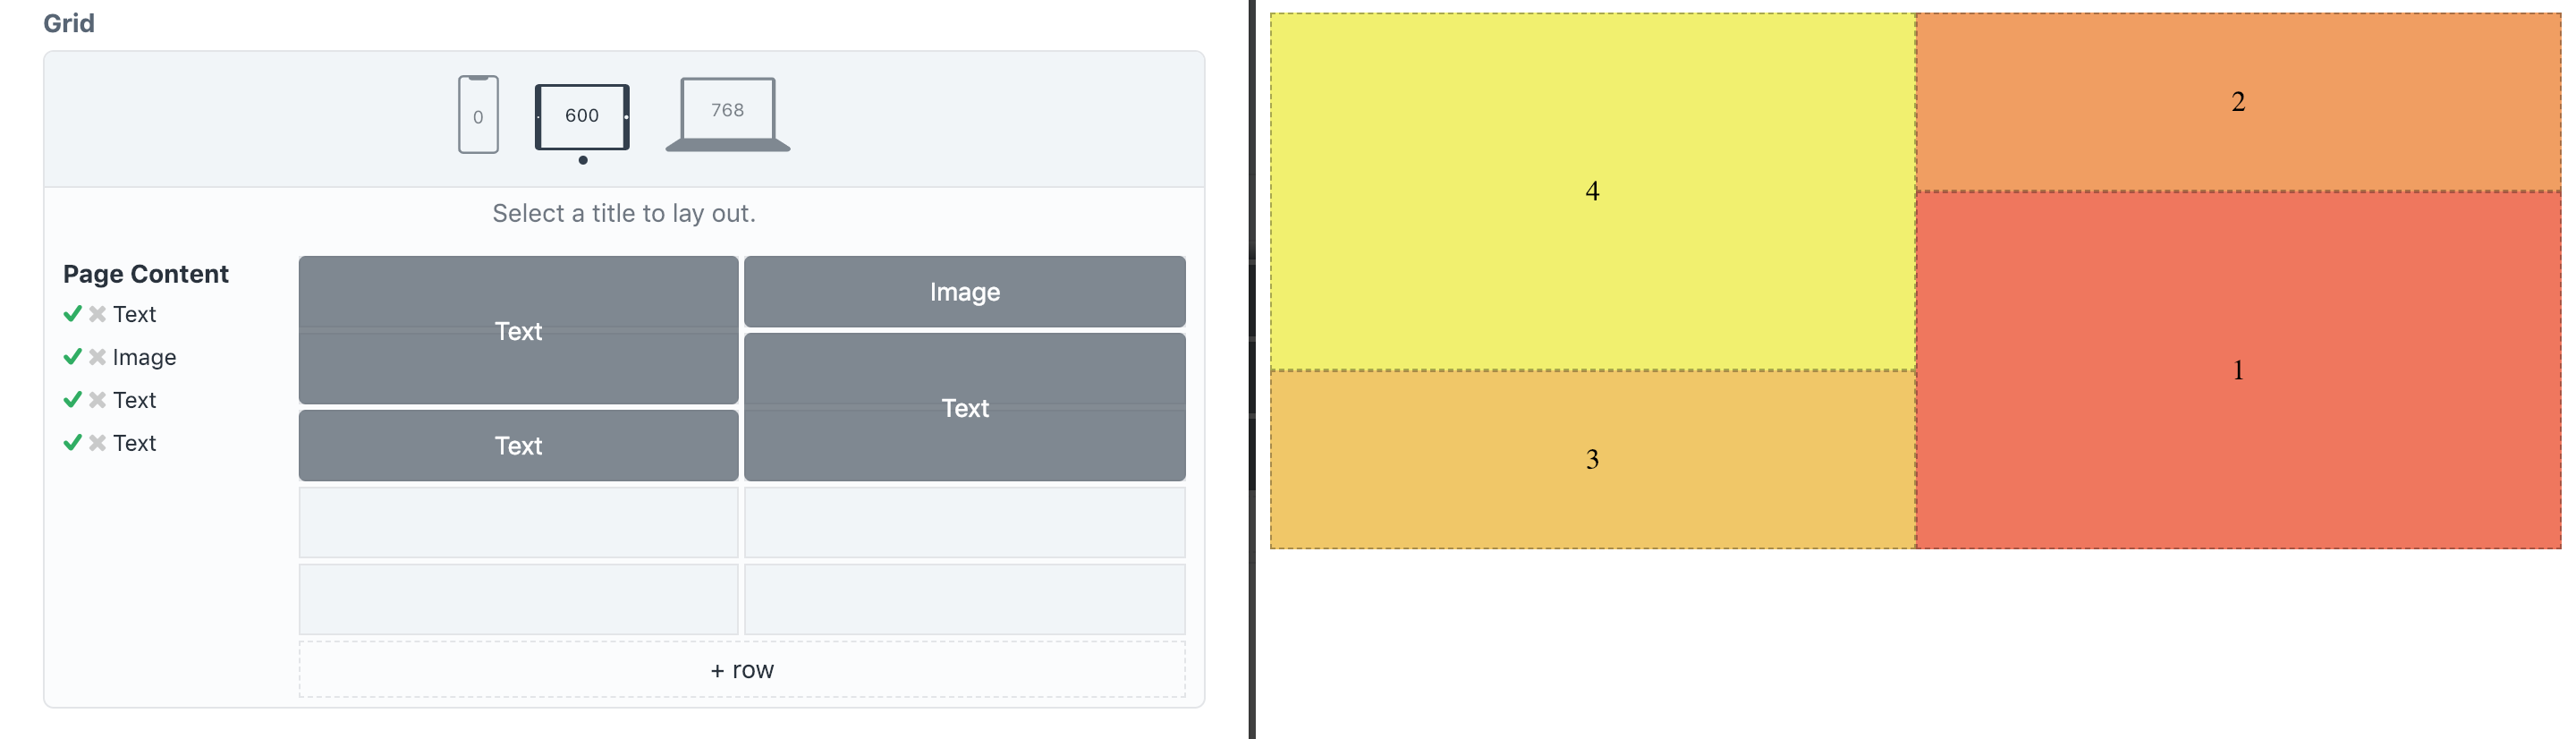 Live Preview example of grid layout